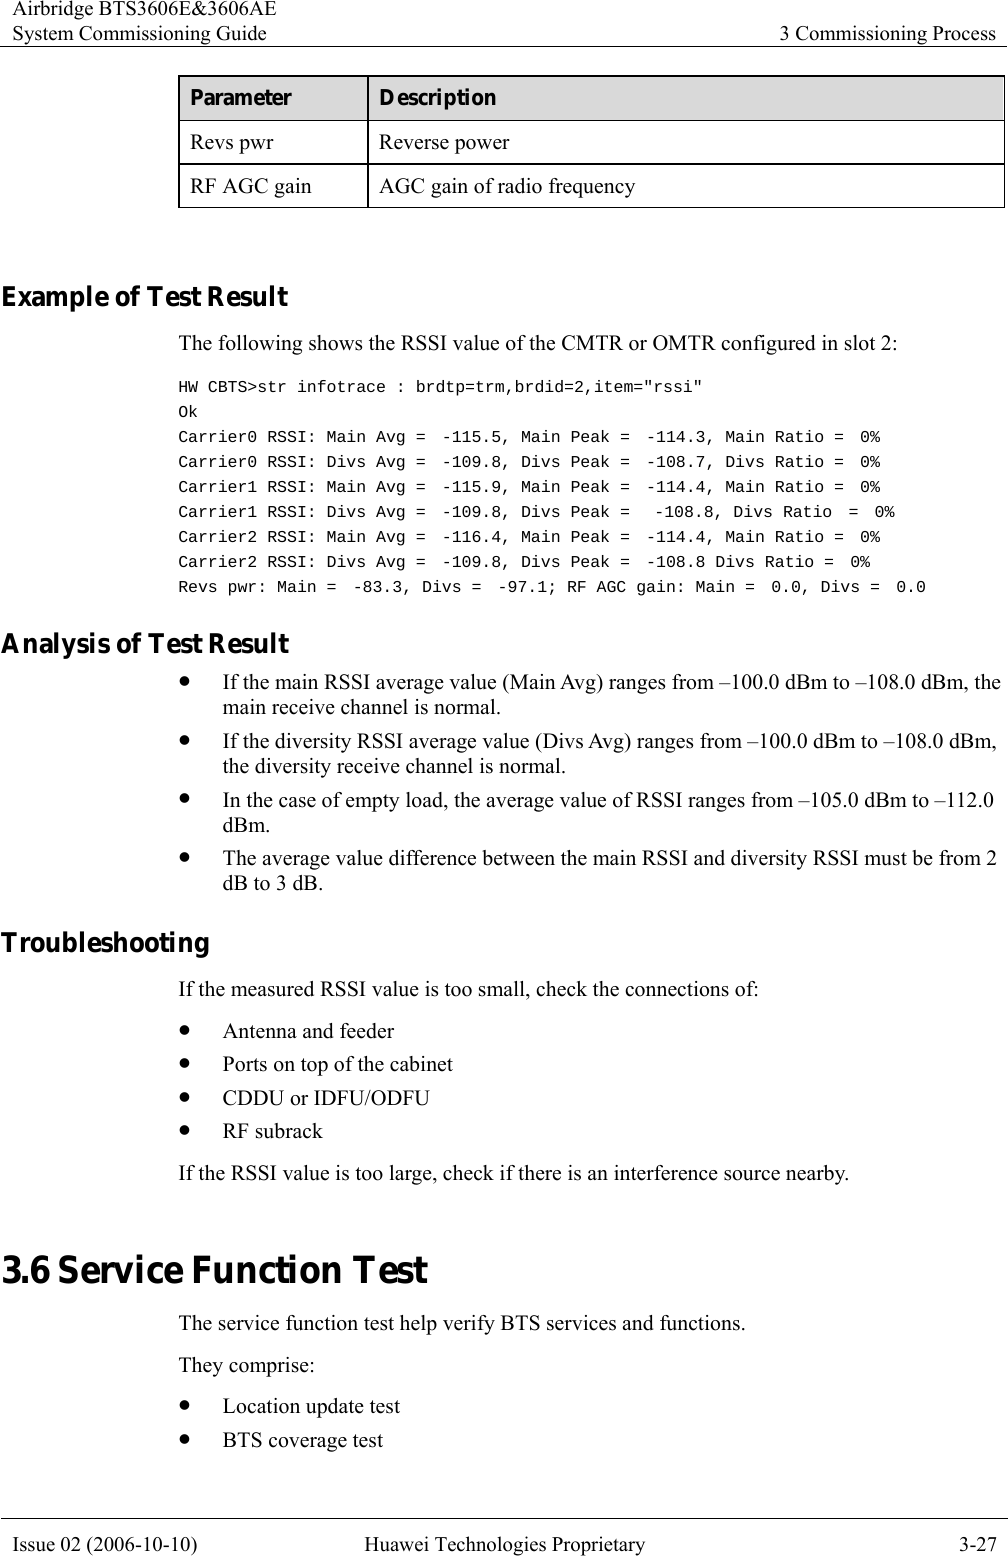 Airbridge BTS3606E&amp;3606AE System Commissioning Guide  3 Commissioning Process Issue 02 (2006-10-10)  Huawei Technologies Proprietary  3-27 Parameter  Description Revs pwr  Reverse power   RF AGC gain  AGC gain of radio frequency  Example of Test Result The following shows the RSSI value of the CMTR or OMTR configured in slot 2: HW CBTS&gt;str infotrace : brdtp=trm,brdid=2,item=&quot;rssi&quot; Ok Carrier0 RSSI: Main Avg =  -115.5, Main Peak =  -114.3, Main Ratio =  0% Carrier0 RSSI: Divs Avg =  -109.8, Divs Peak =  -108.7, Divs Ratio =  0% Carrier1 RSSI: Main Avg =  -115.9, Main Peak =  -114.4, Main Ratio =  0% Carrier1 RSSI: Divs Avg =  -109.8, Divs Peak =   -108.8, Divs Ratio  =  0% Carrier2 RSSI: Main Avg =  -116.4, Main Peak =  -114.4, Main Ratio =  0% Carrier2 RSSI: Divs Avg =  -109.8, Divs Peak =  -108.8 Divs Ratio =  0% Revs pwr: Main =  -83.3, Divs =  -97.1; RF AGC gain: Main =  0.0, Divs =  0.0 Analysis of Test Result   z If the main RSSI average value (Main Avg) ranges from –100.0 dBm to –108.0 dBm, the main receive channel is normal. z If the diversity RSSI average value (Divs Avg) ranges from –100.0 dBm to –108.0 dBm, the diversity receive channel is normal. z In the case of empty load, the average value of RSSI ranges from –105.0 dBm to –112.0 dBm. z The average value difference between the main RSSI and diversity RSSI must be from 2 dB to 3 dB. Troubleshooting If the measured RSSI value is too small, check the connections of: z Antenna and feeder z Ports on top of the cabinet z CDDU or IDFU/ODFU z RF subrack If the RSSI value is too large, check if there is an interference source nearby. 3.6 Service Function Test The service function test help verify BTS services and functions. They comprise: z Location update test z BTS coverage test 